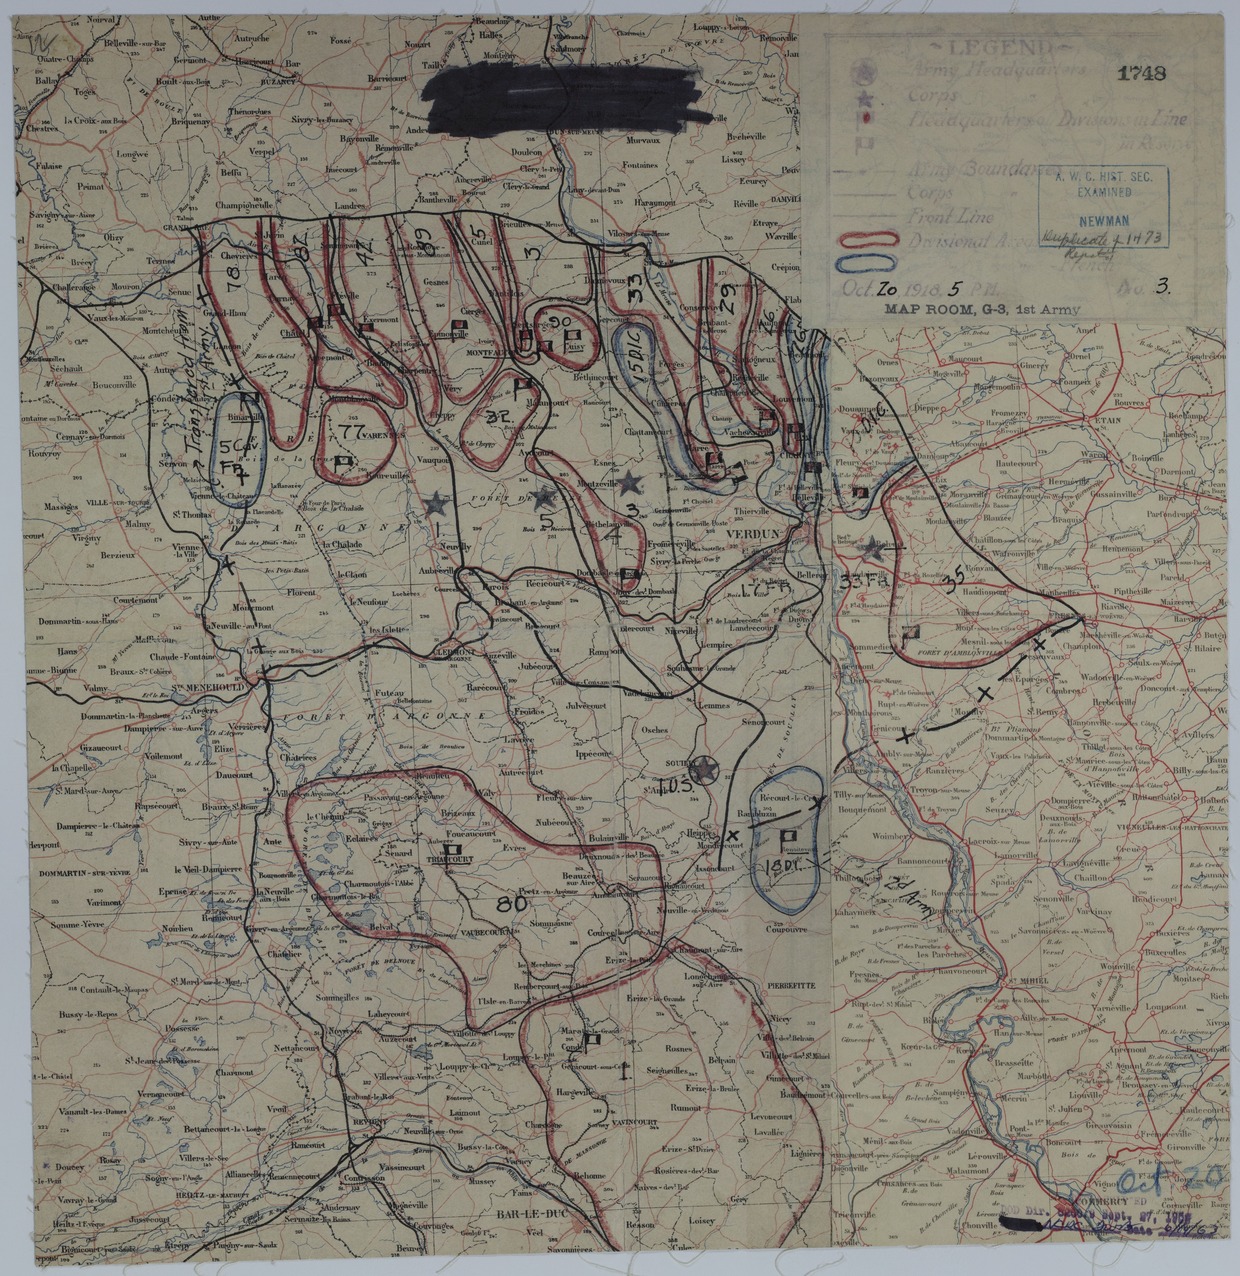 Map of Divisional Positions on October 20, 1918